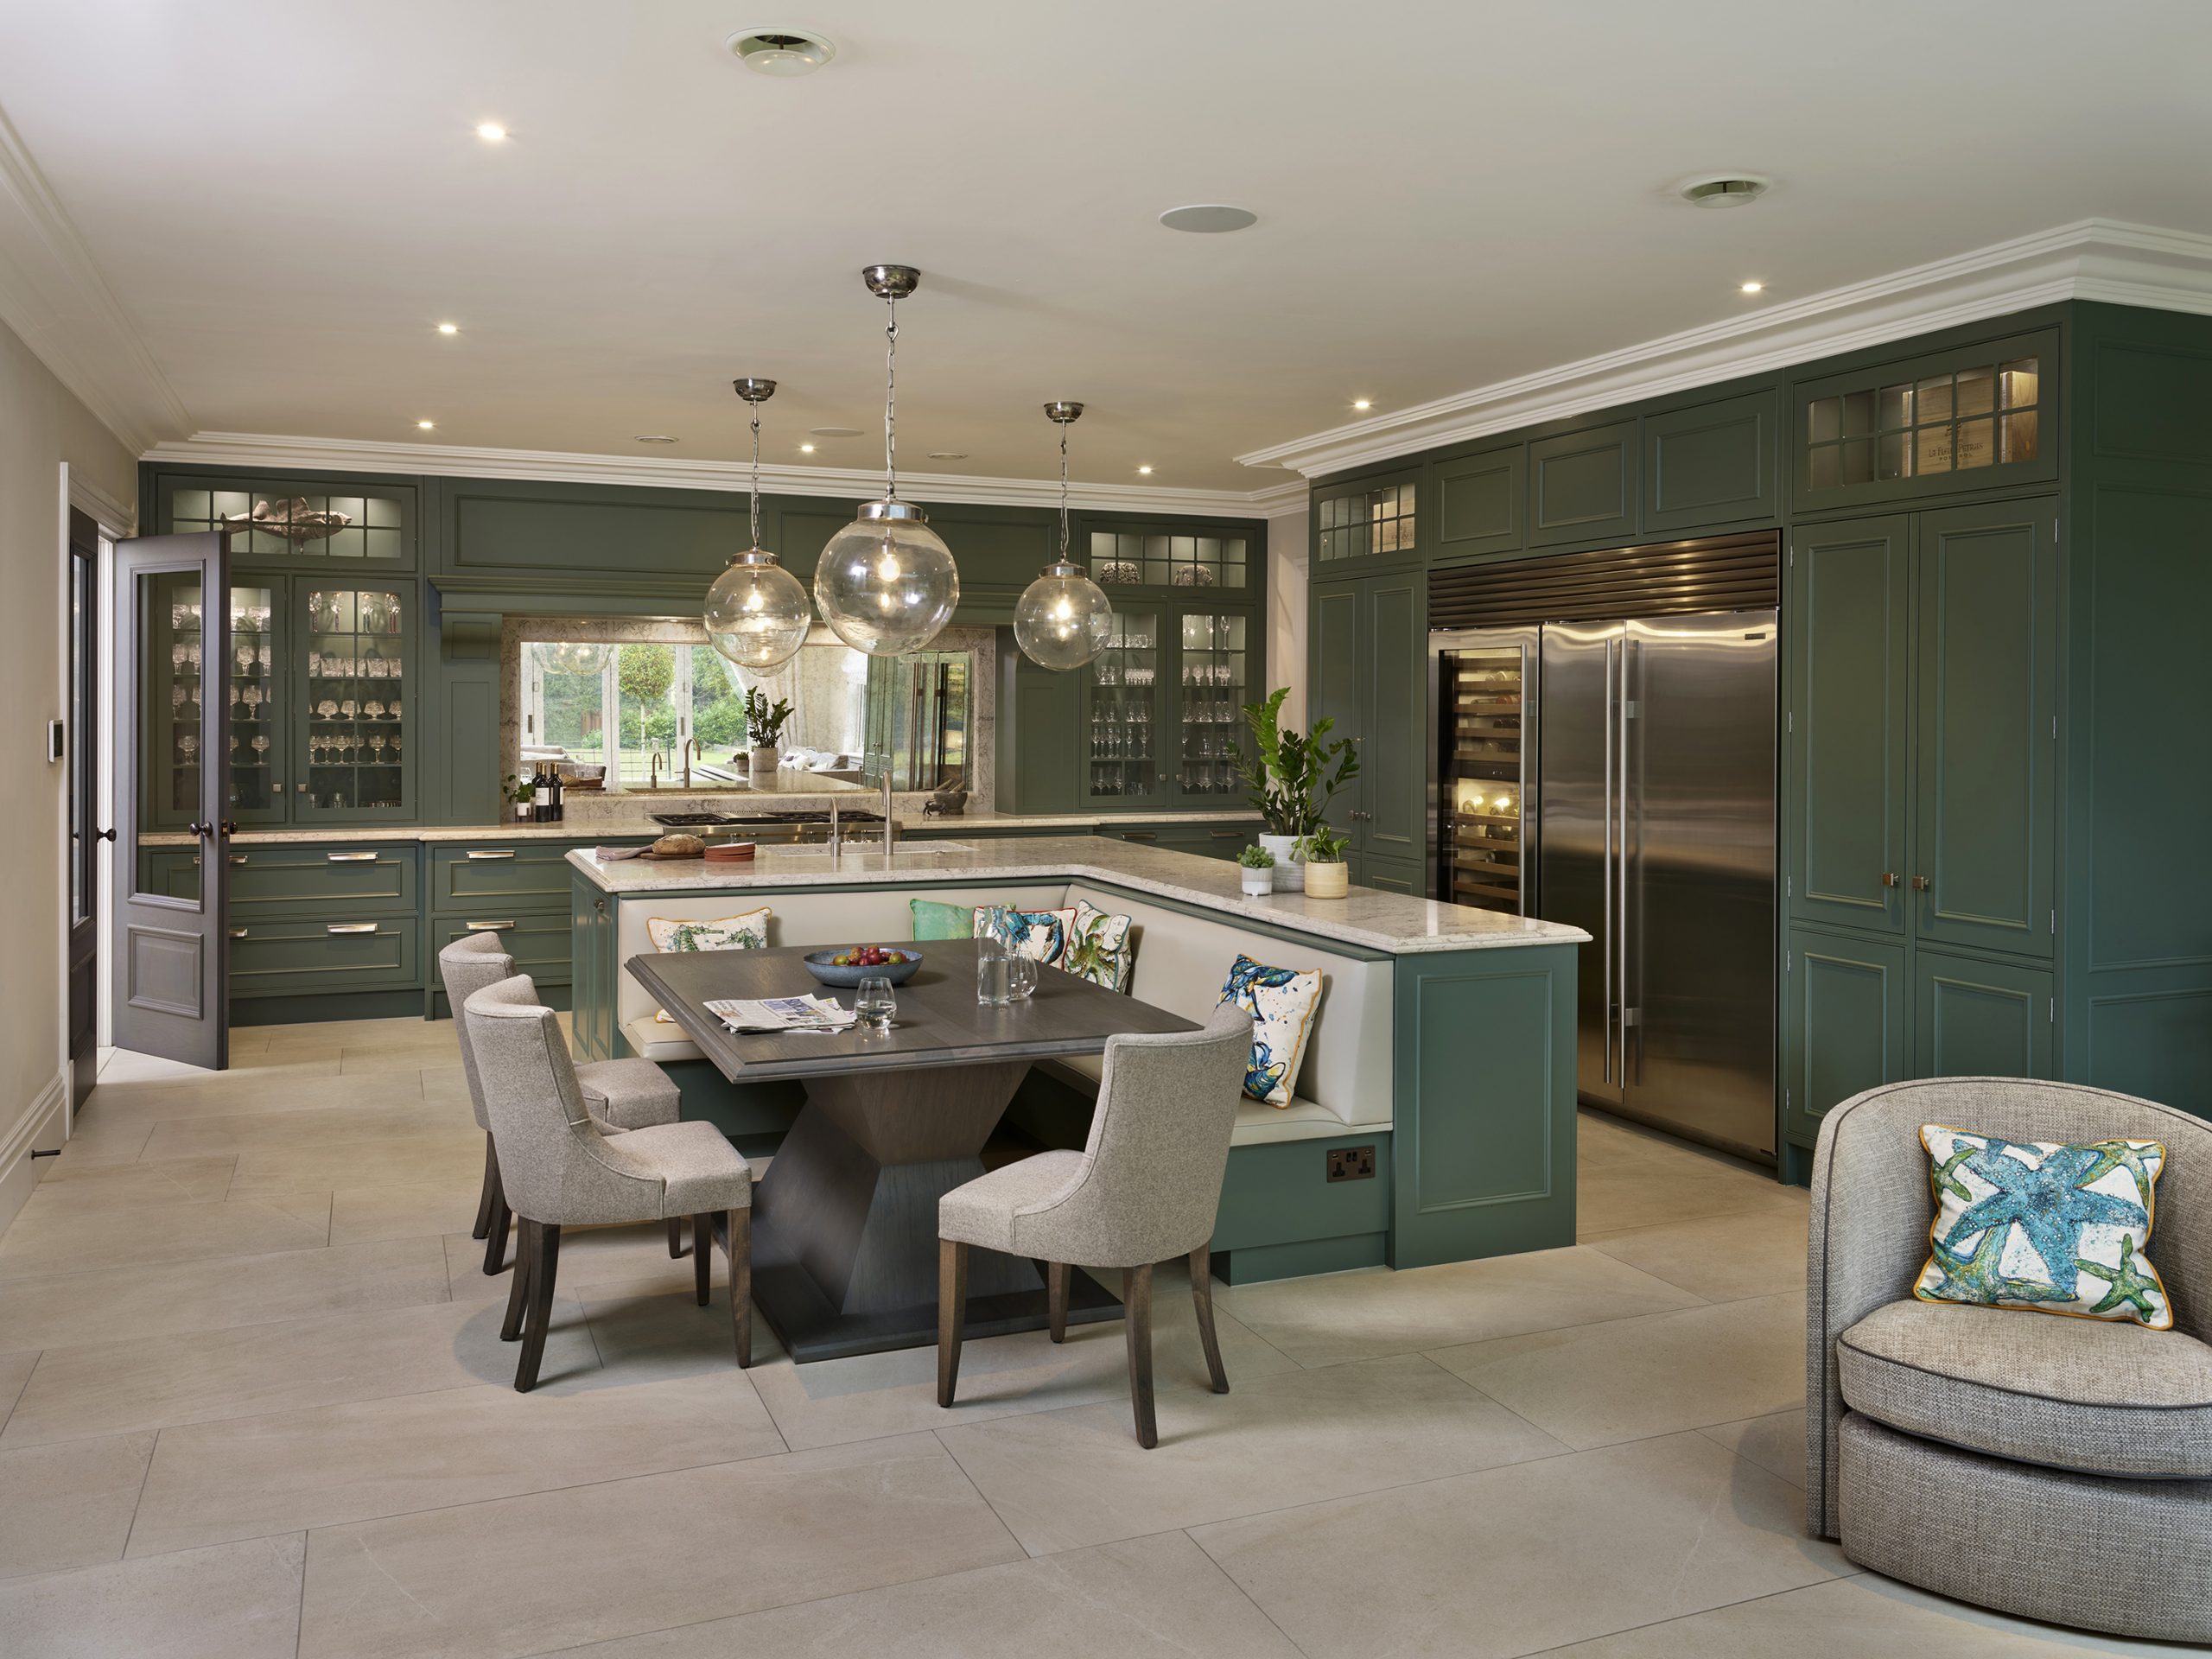 Classic englemere kitchen in deep green with banquette seating integrated into the island. Sub zero and wolf appliances in this kitchen add to the luxury aesthetic.  